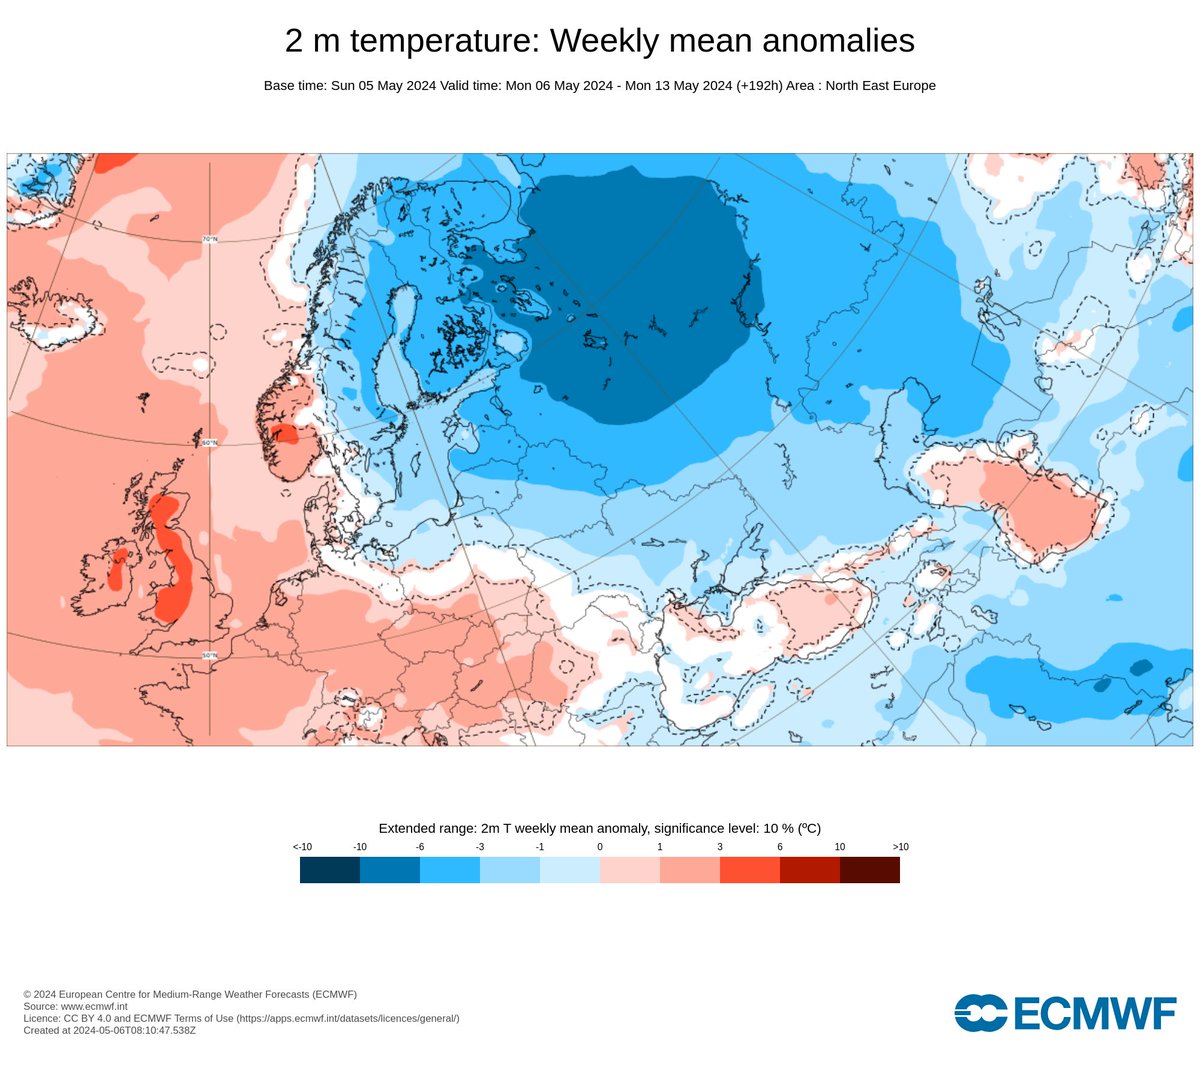 Again, persistent upper-level low has appeared over North East Europe and keeps temperatures below normal this week and possibly beyond that. I hate to say it, but it resembles the pattern in May-June 2017...